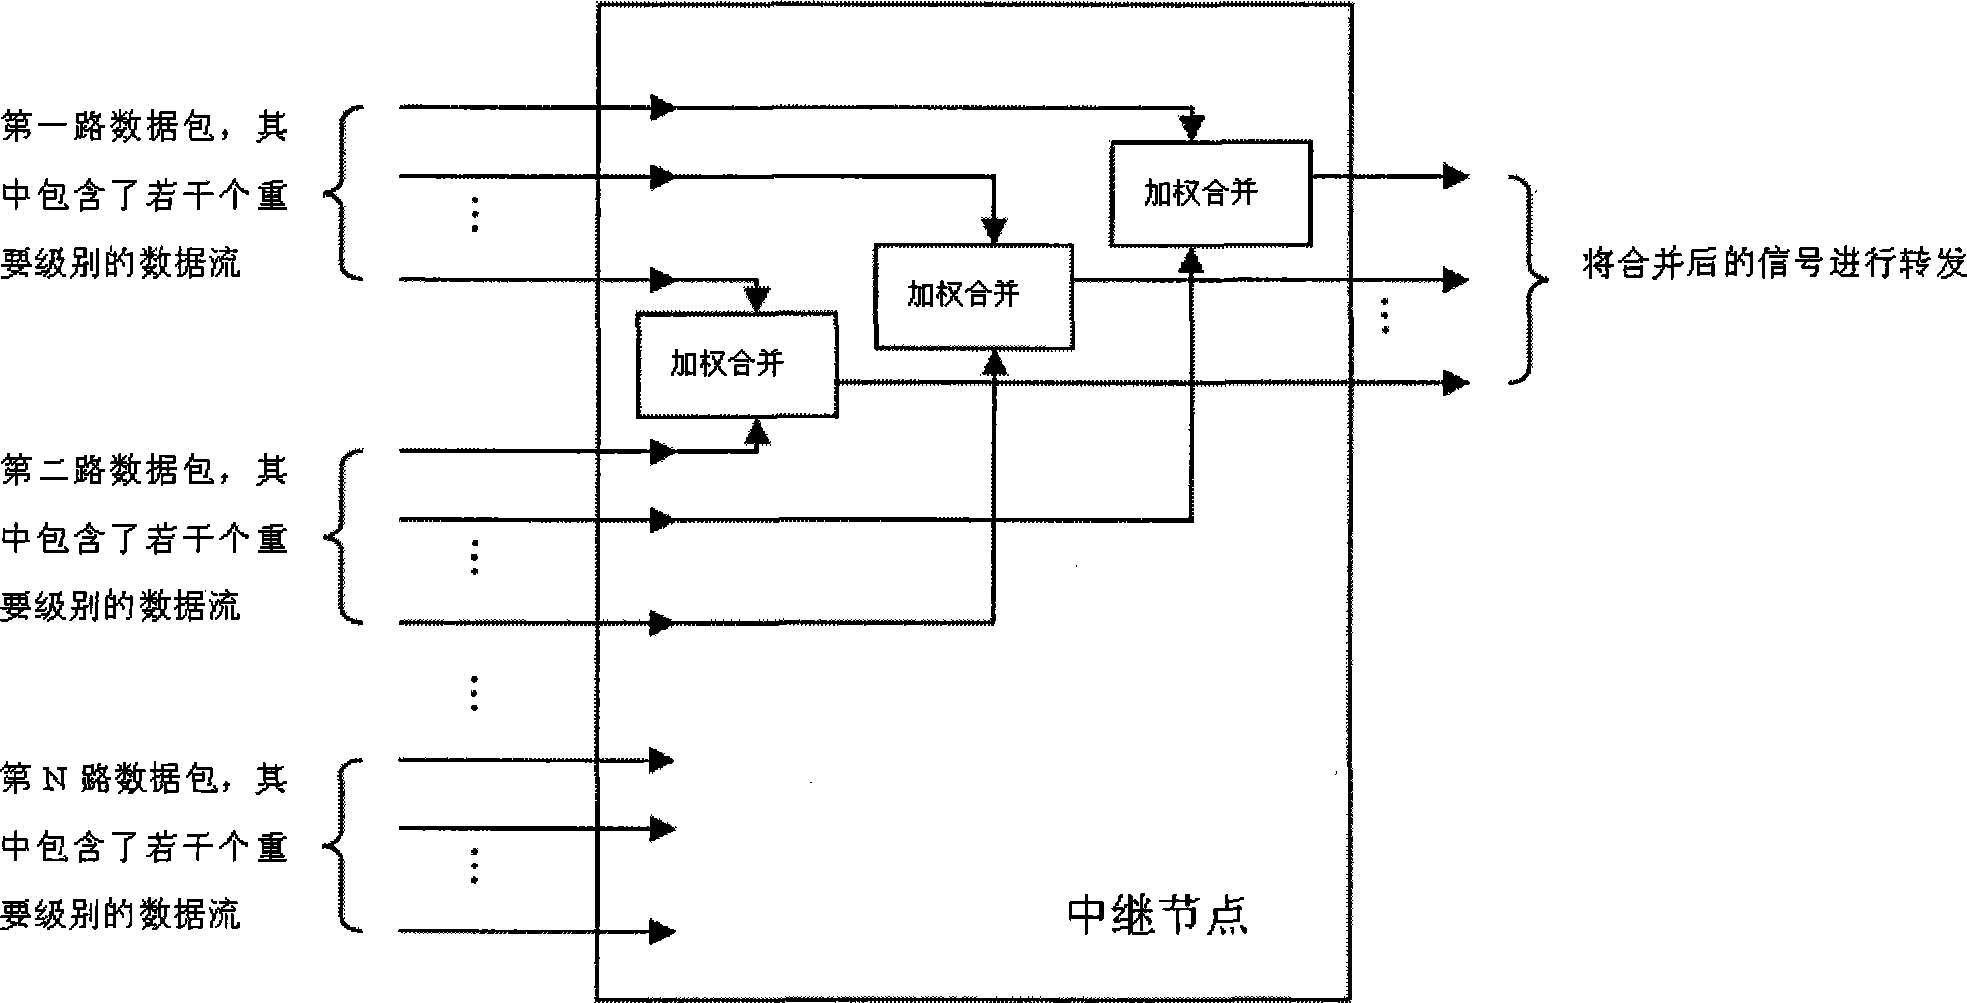 Non-uniform error protection method based on physical layer network coding technique in relay system